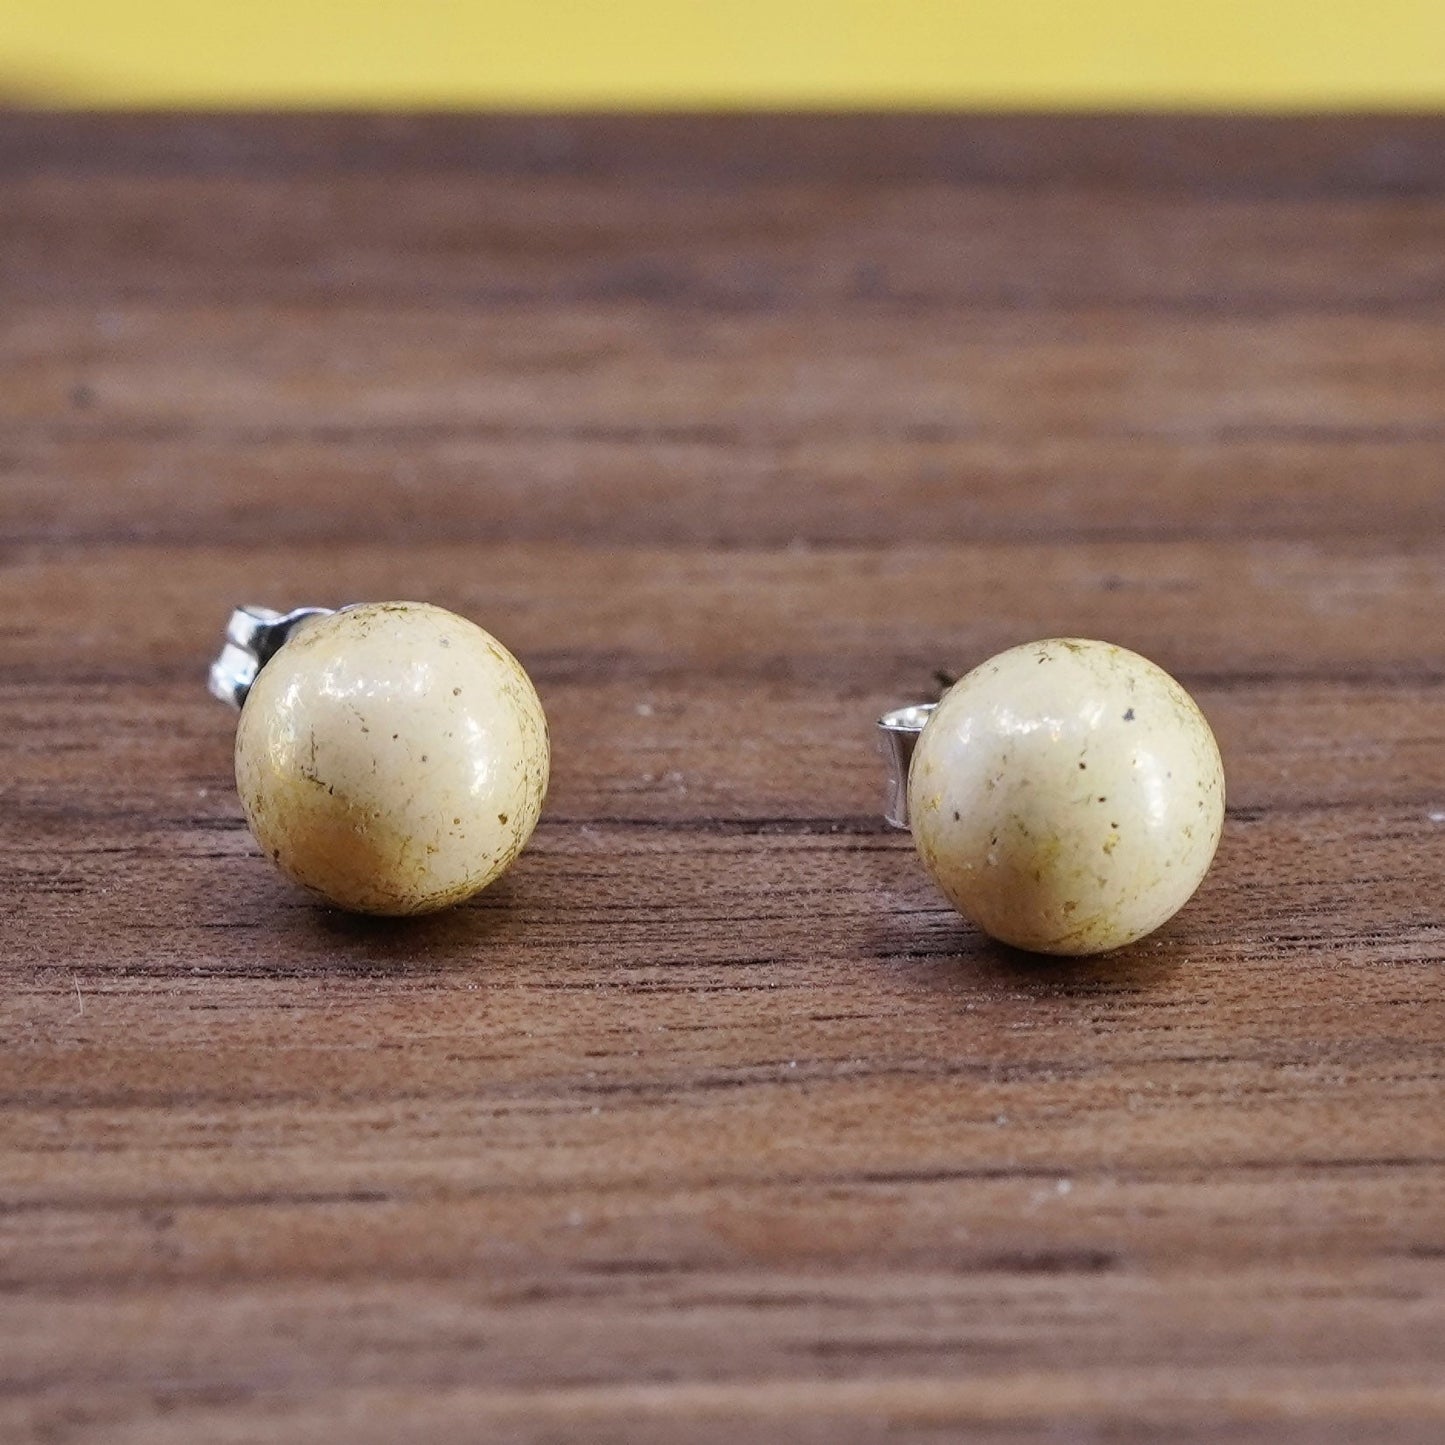 7mm, Vintage vermeil gold over Sterling silver beads studs, 925 earrings